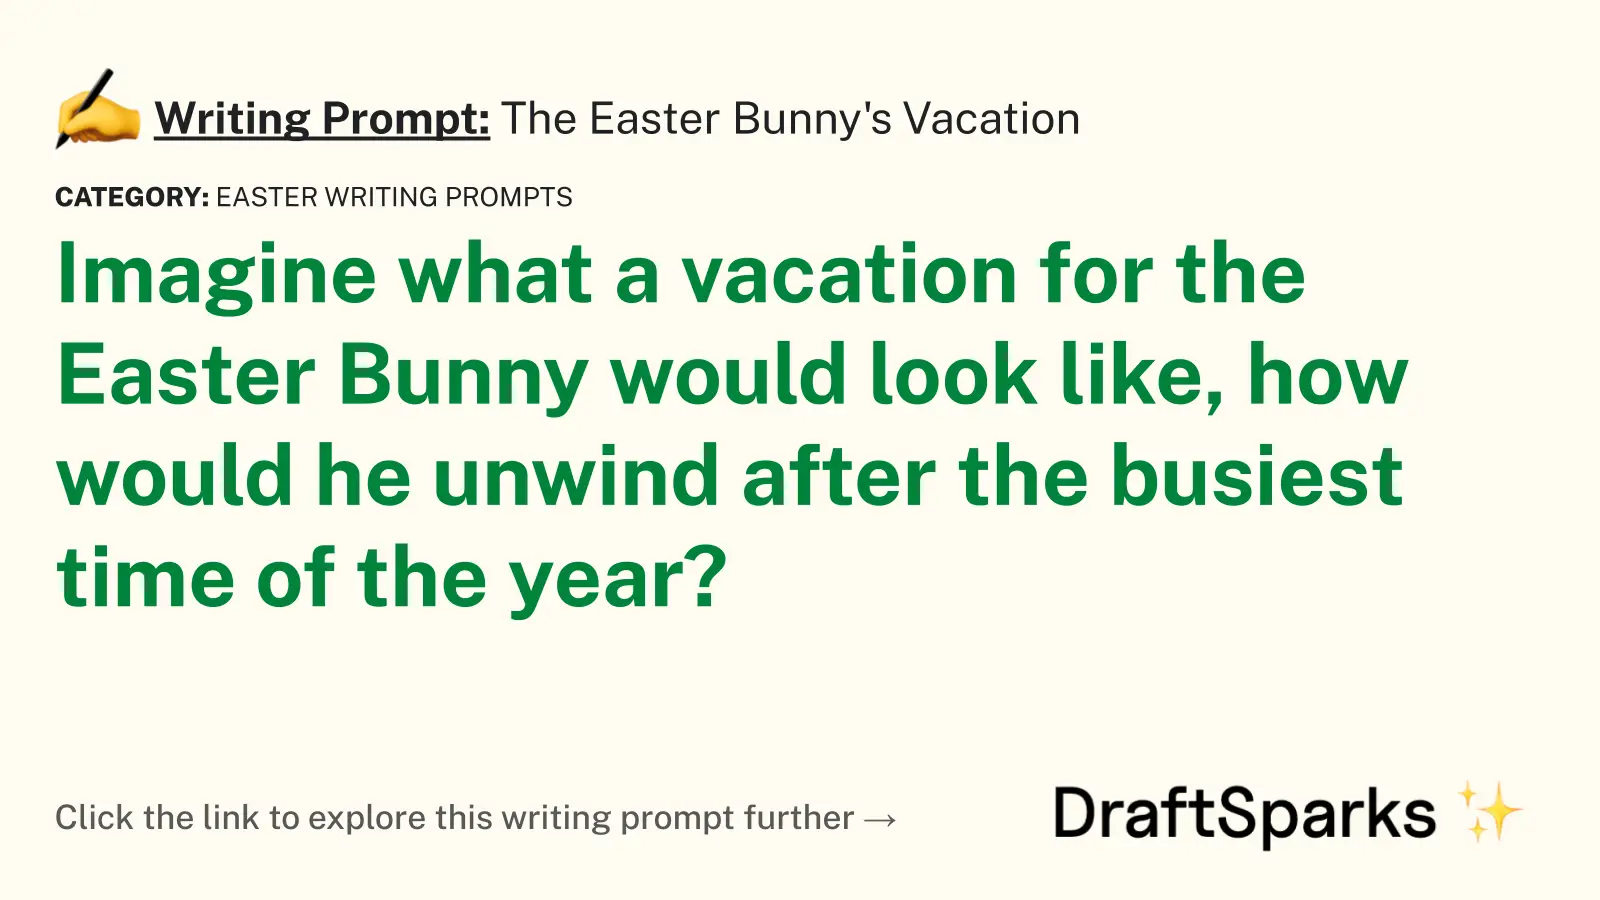 The Easter Bunny’s Vacation